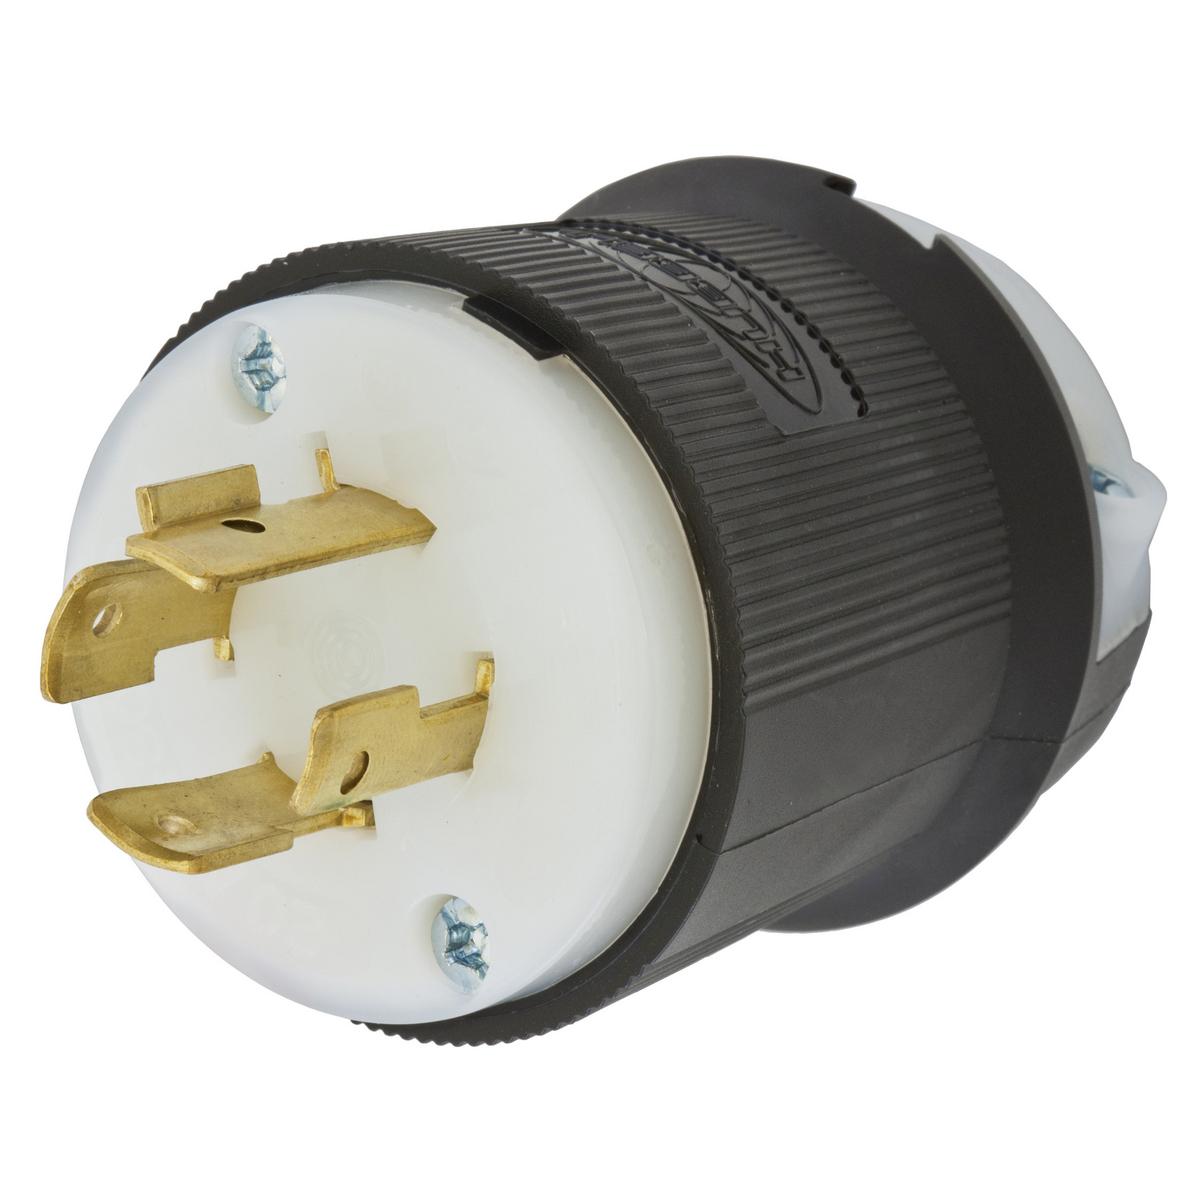 Hubbell HBL2431 Locking Devices, Twist-Lock®, Industrial, Male Insulgrip® Plug, 20A 3-Phase 480V AC, 3-Pole 4-Wire Grounding, NEMA L16-20P, Screw Terminal, Black and White Nylon.  ; Superior cord grip design protects terminations from excess strain. ; Clear, funnel shape